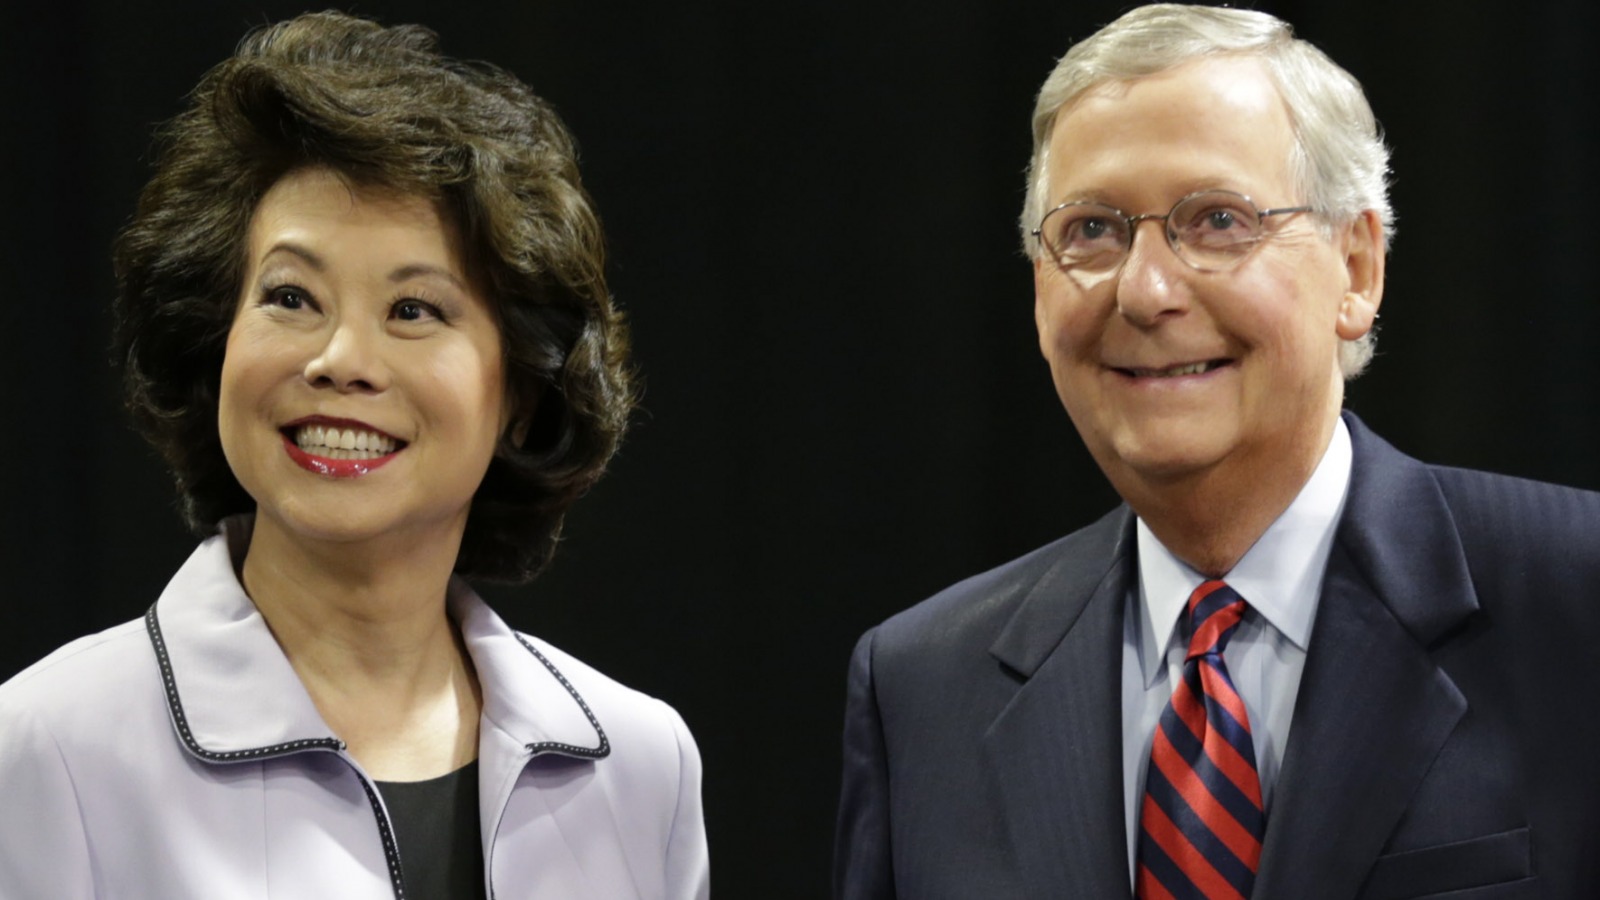 Mitch McConnell and Elaine Chao - interracial couple